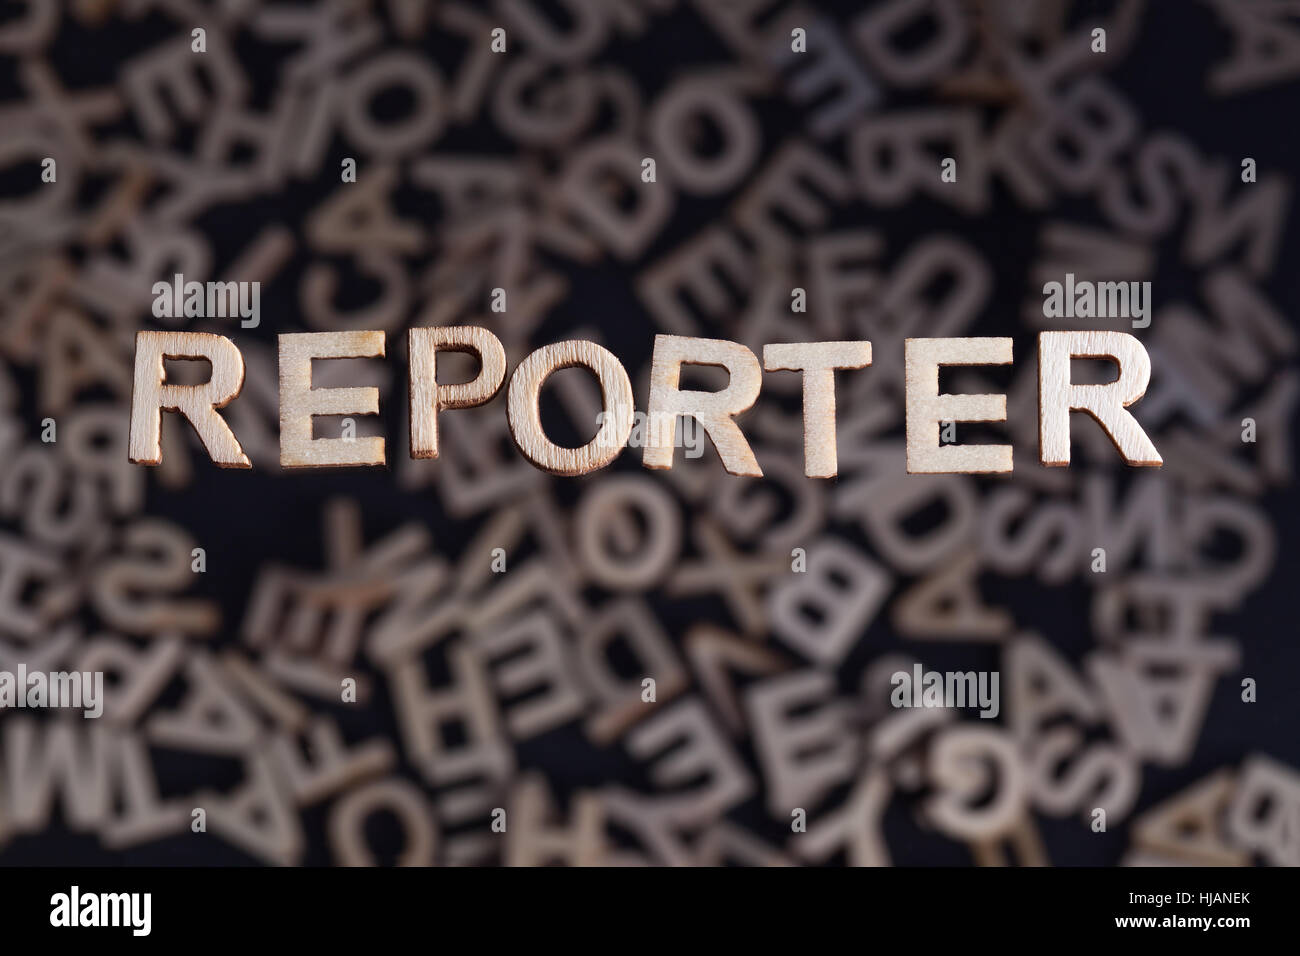 Reporter wooden letters created in wood floating above random letters below out of focus on a black background Stock Photo